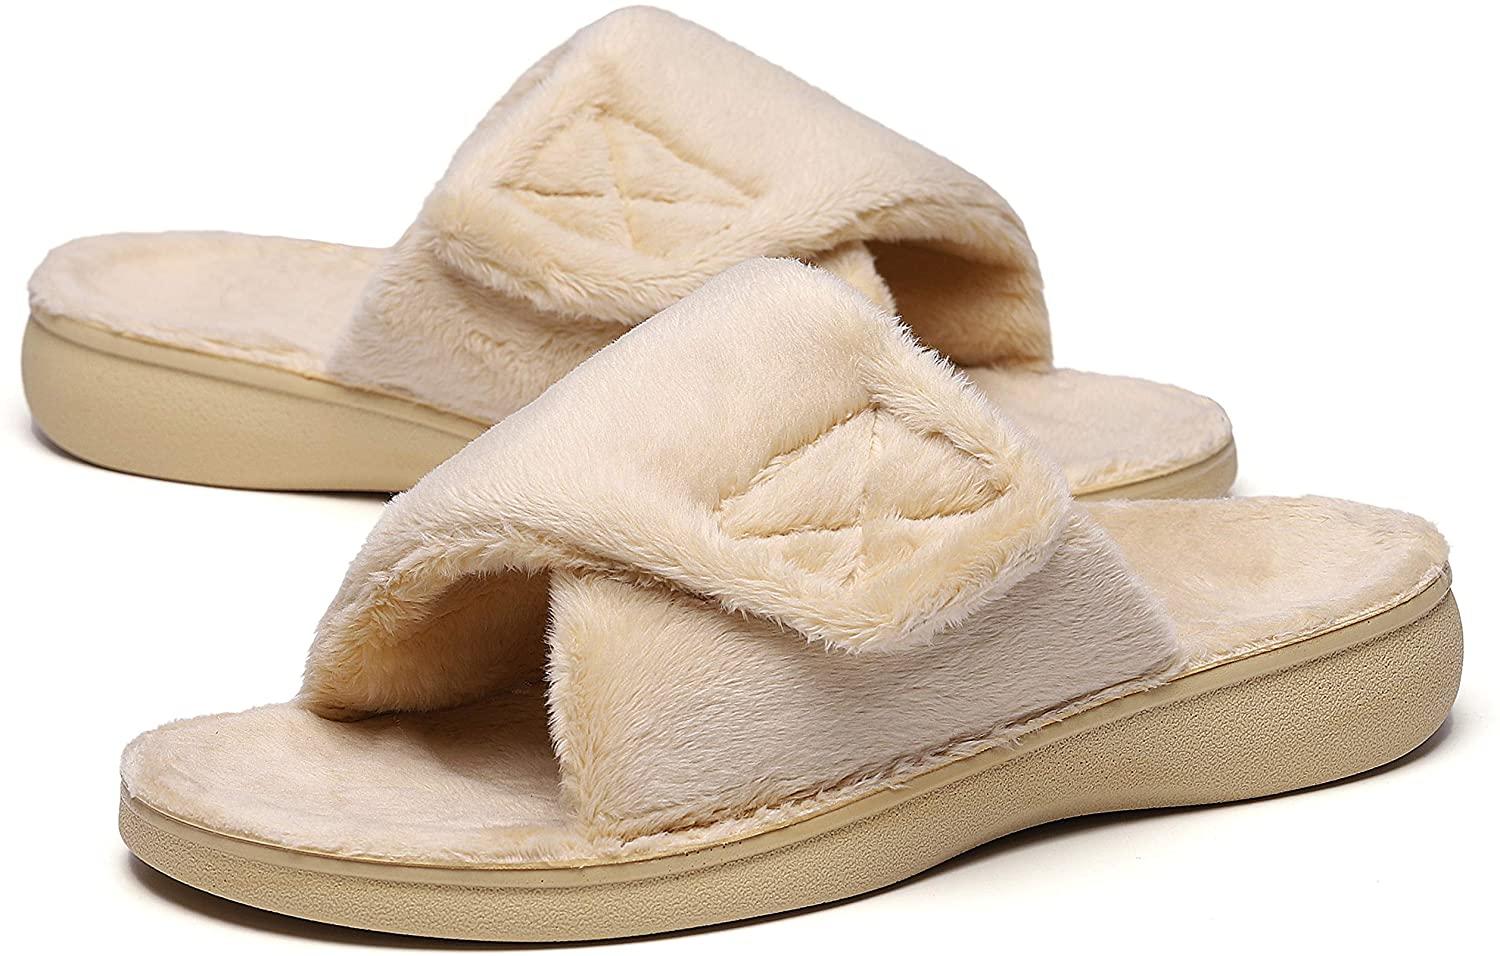 Fuzzy house slippers with arch support 